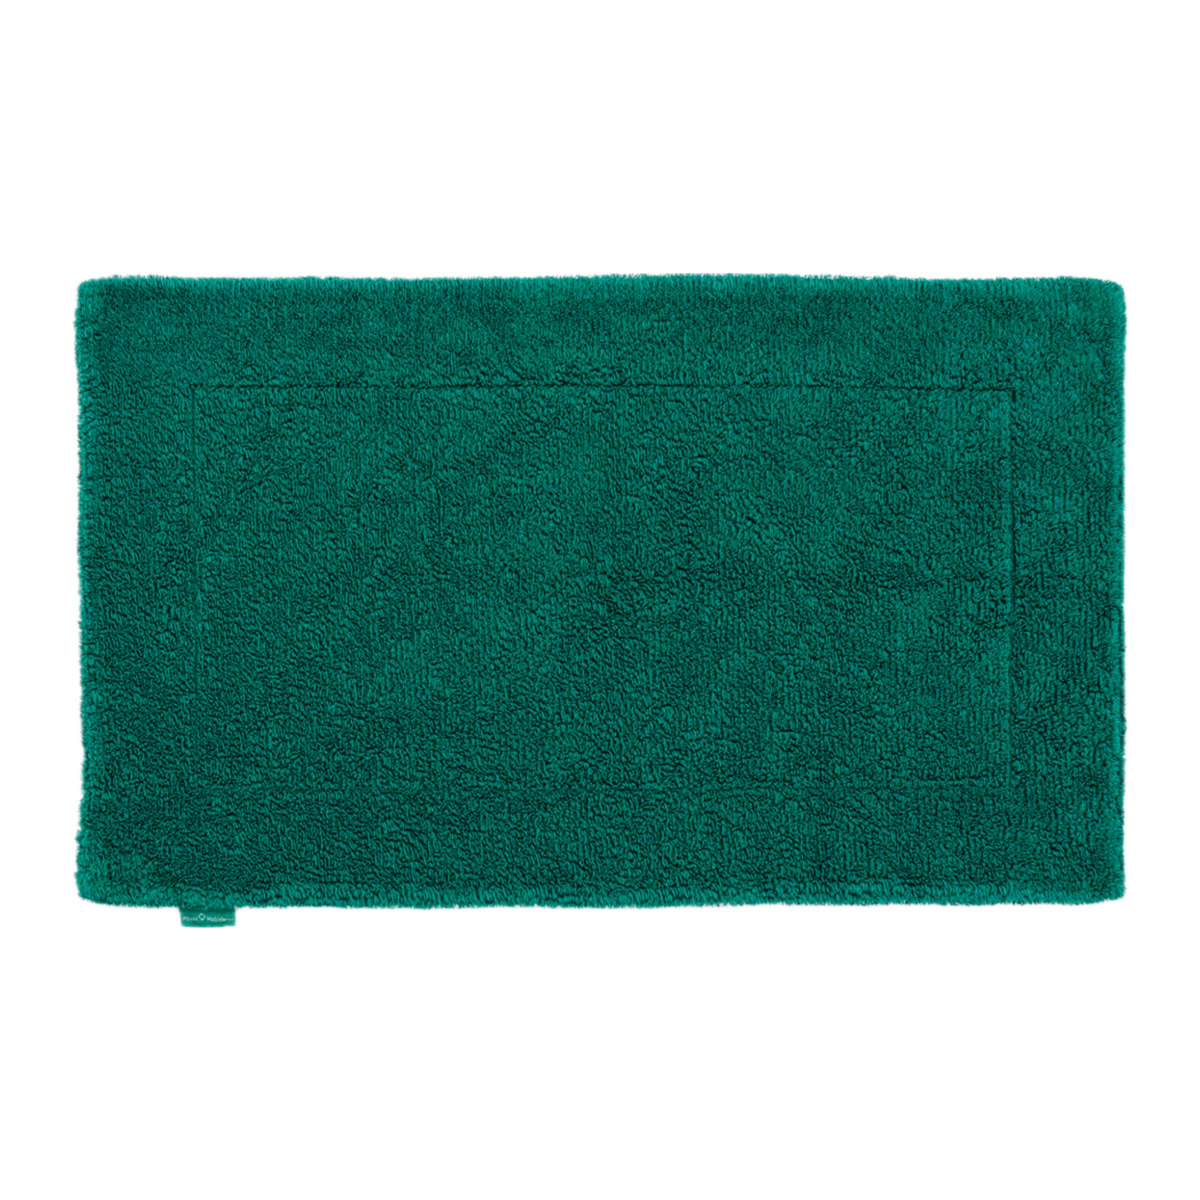 Abyss Double Bath Tub Mat in British Green (298) Color